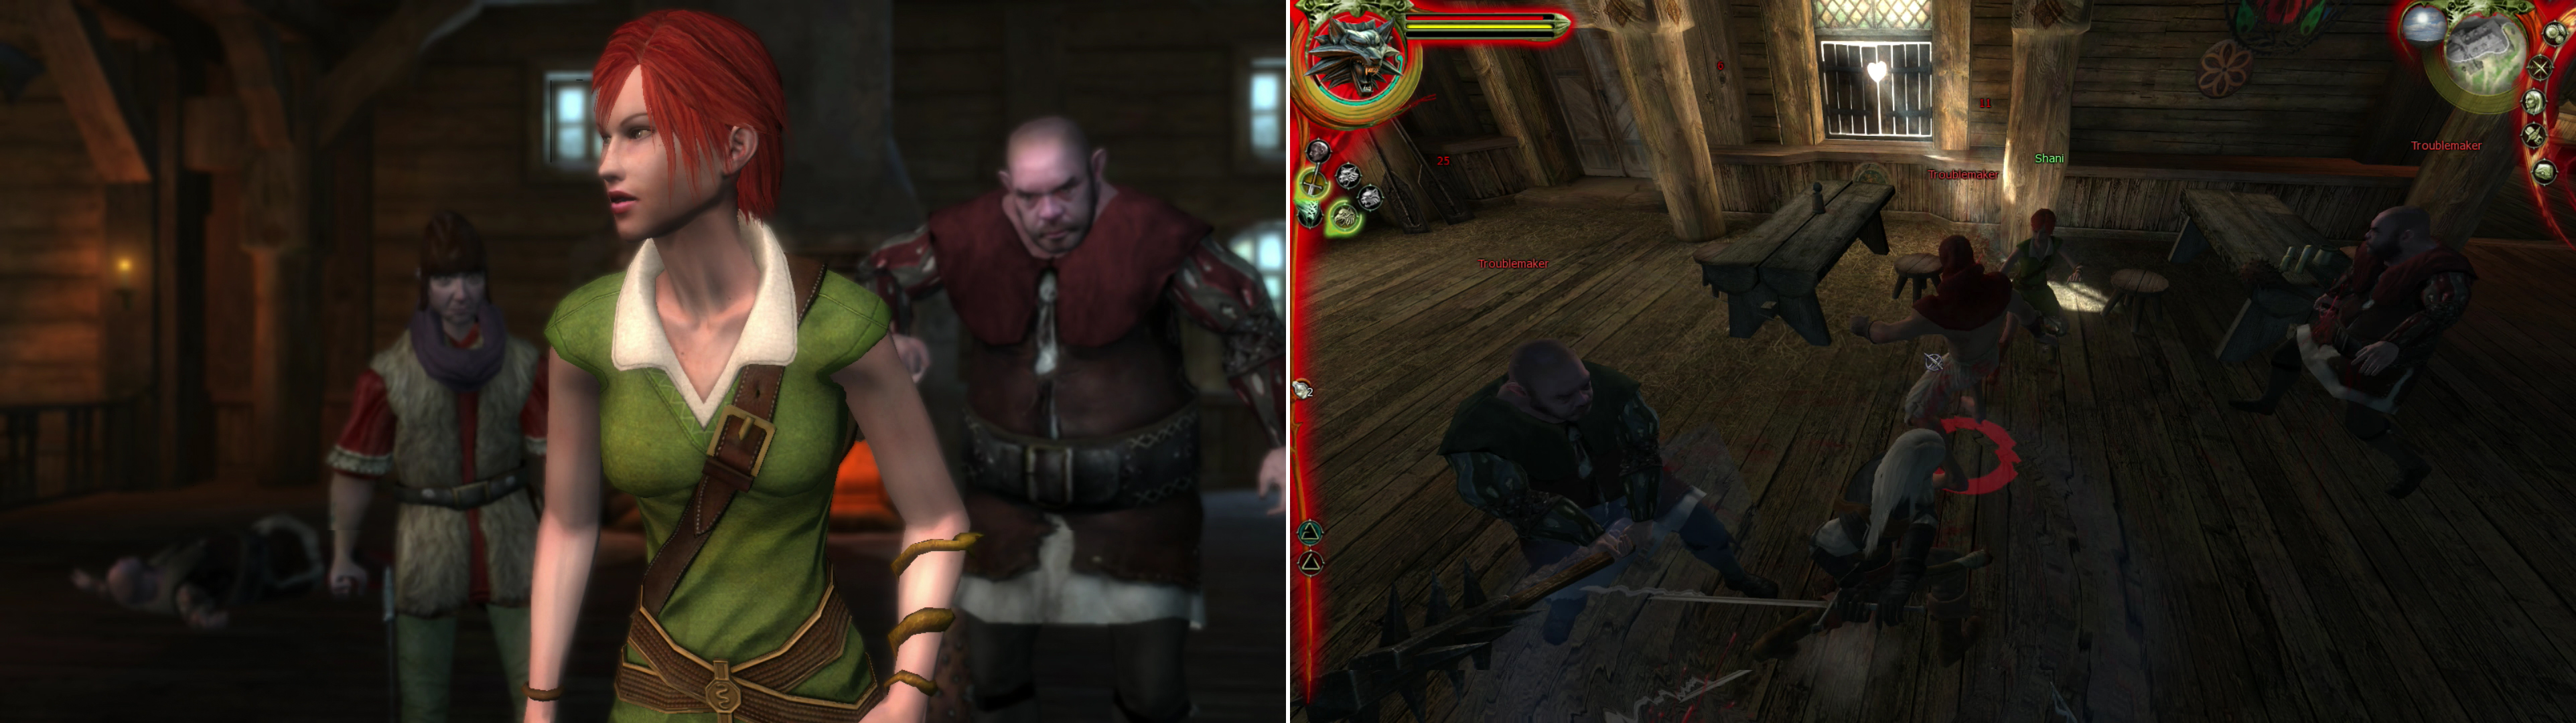 Another day, another woman threatened in the Outskirts (left) to which Geralt has only one response (right).